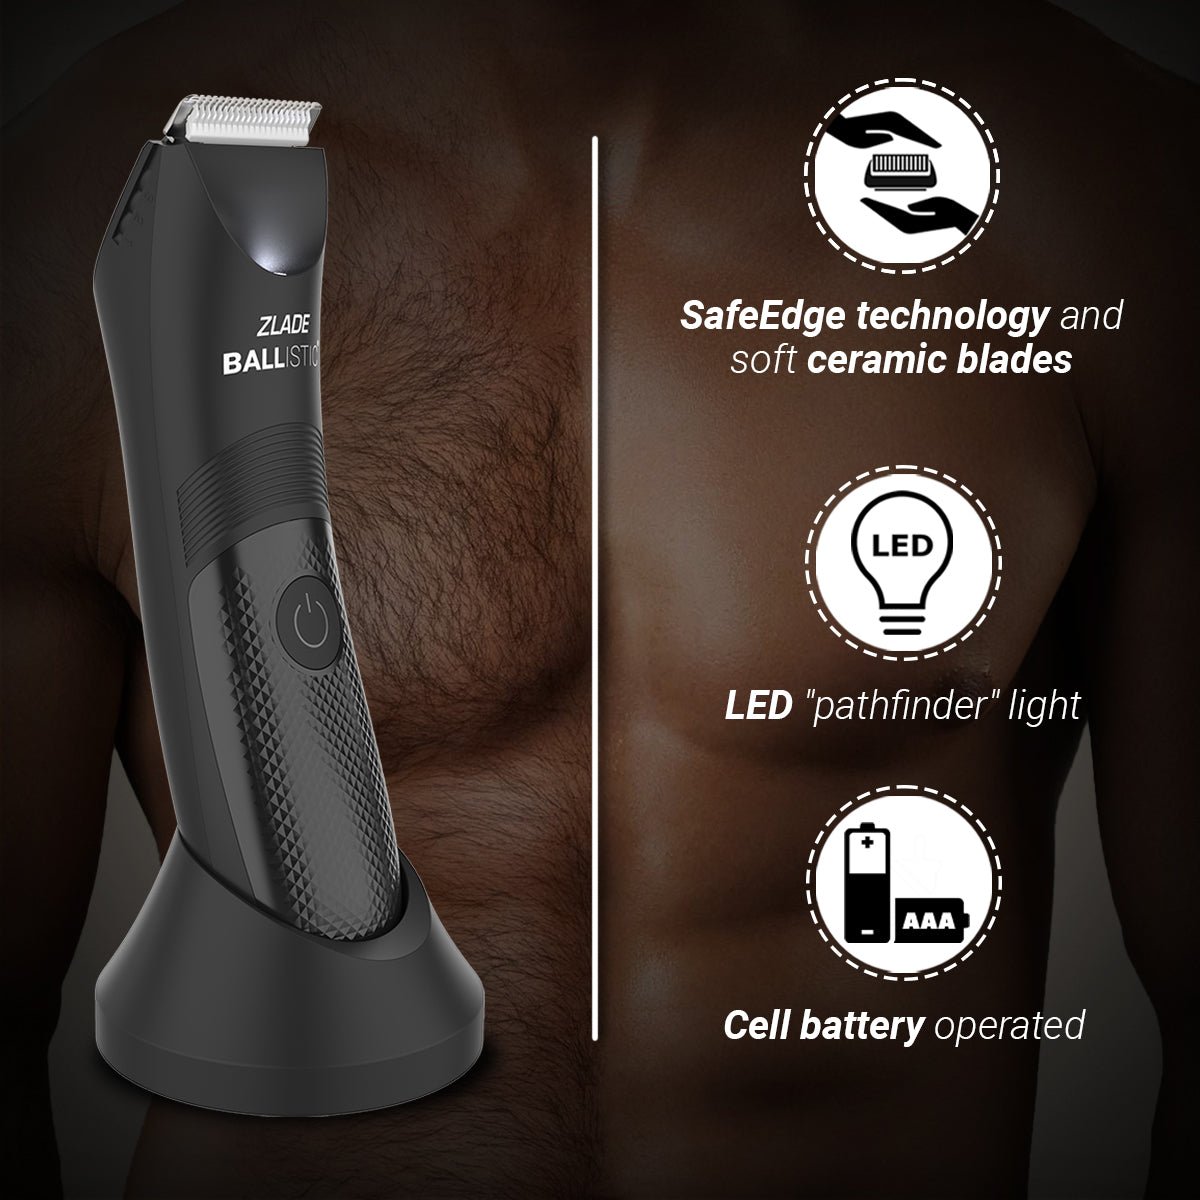 Zlade Ballistic Lite Body and Nose & Ear Hair Trimmer Combo